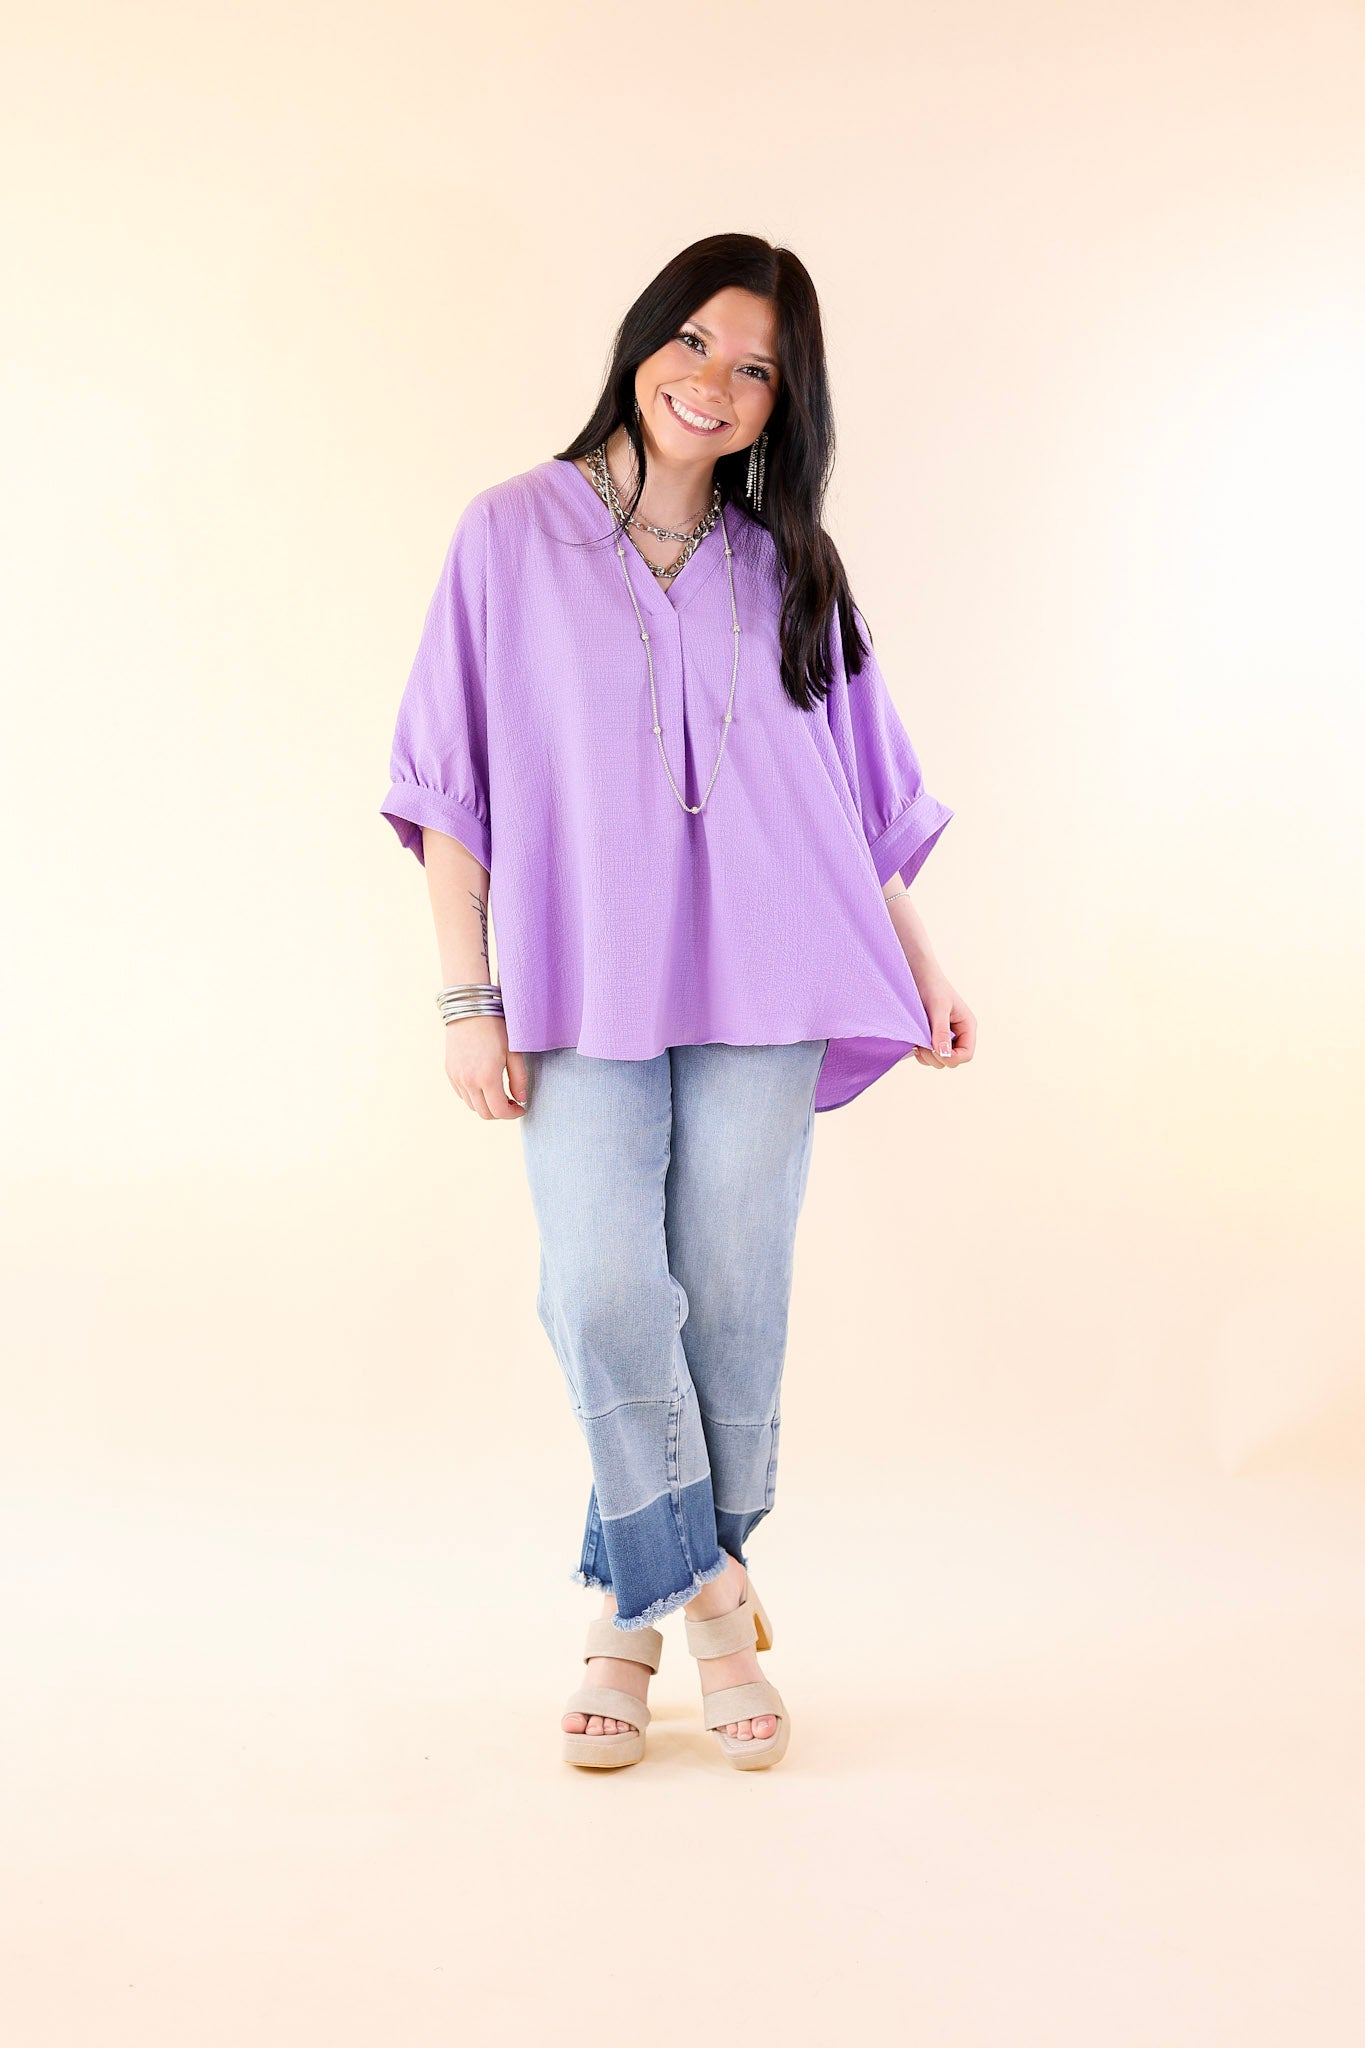 Chic and Charming V Neck Top with 3/4 Sleeves in Lavender Purple - Giddy Up Glamour Boutique